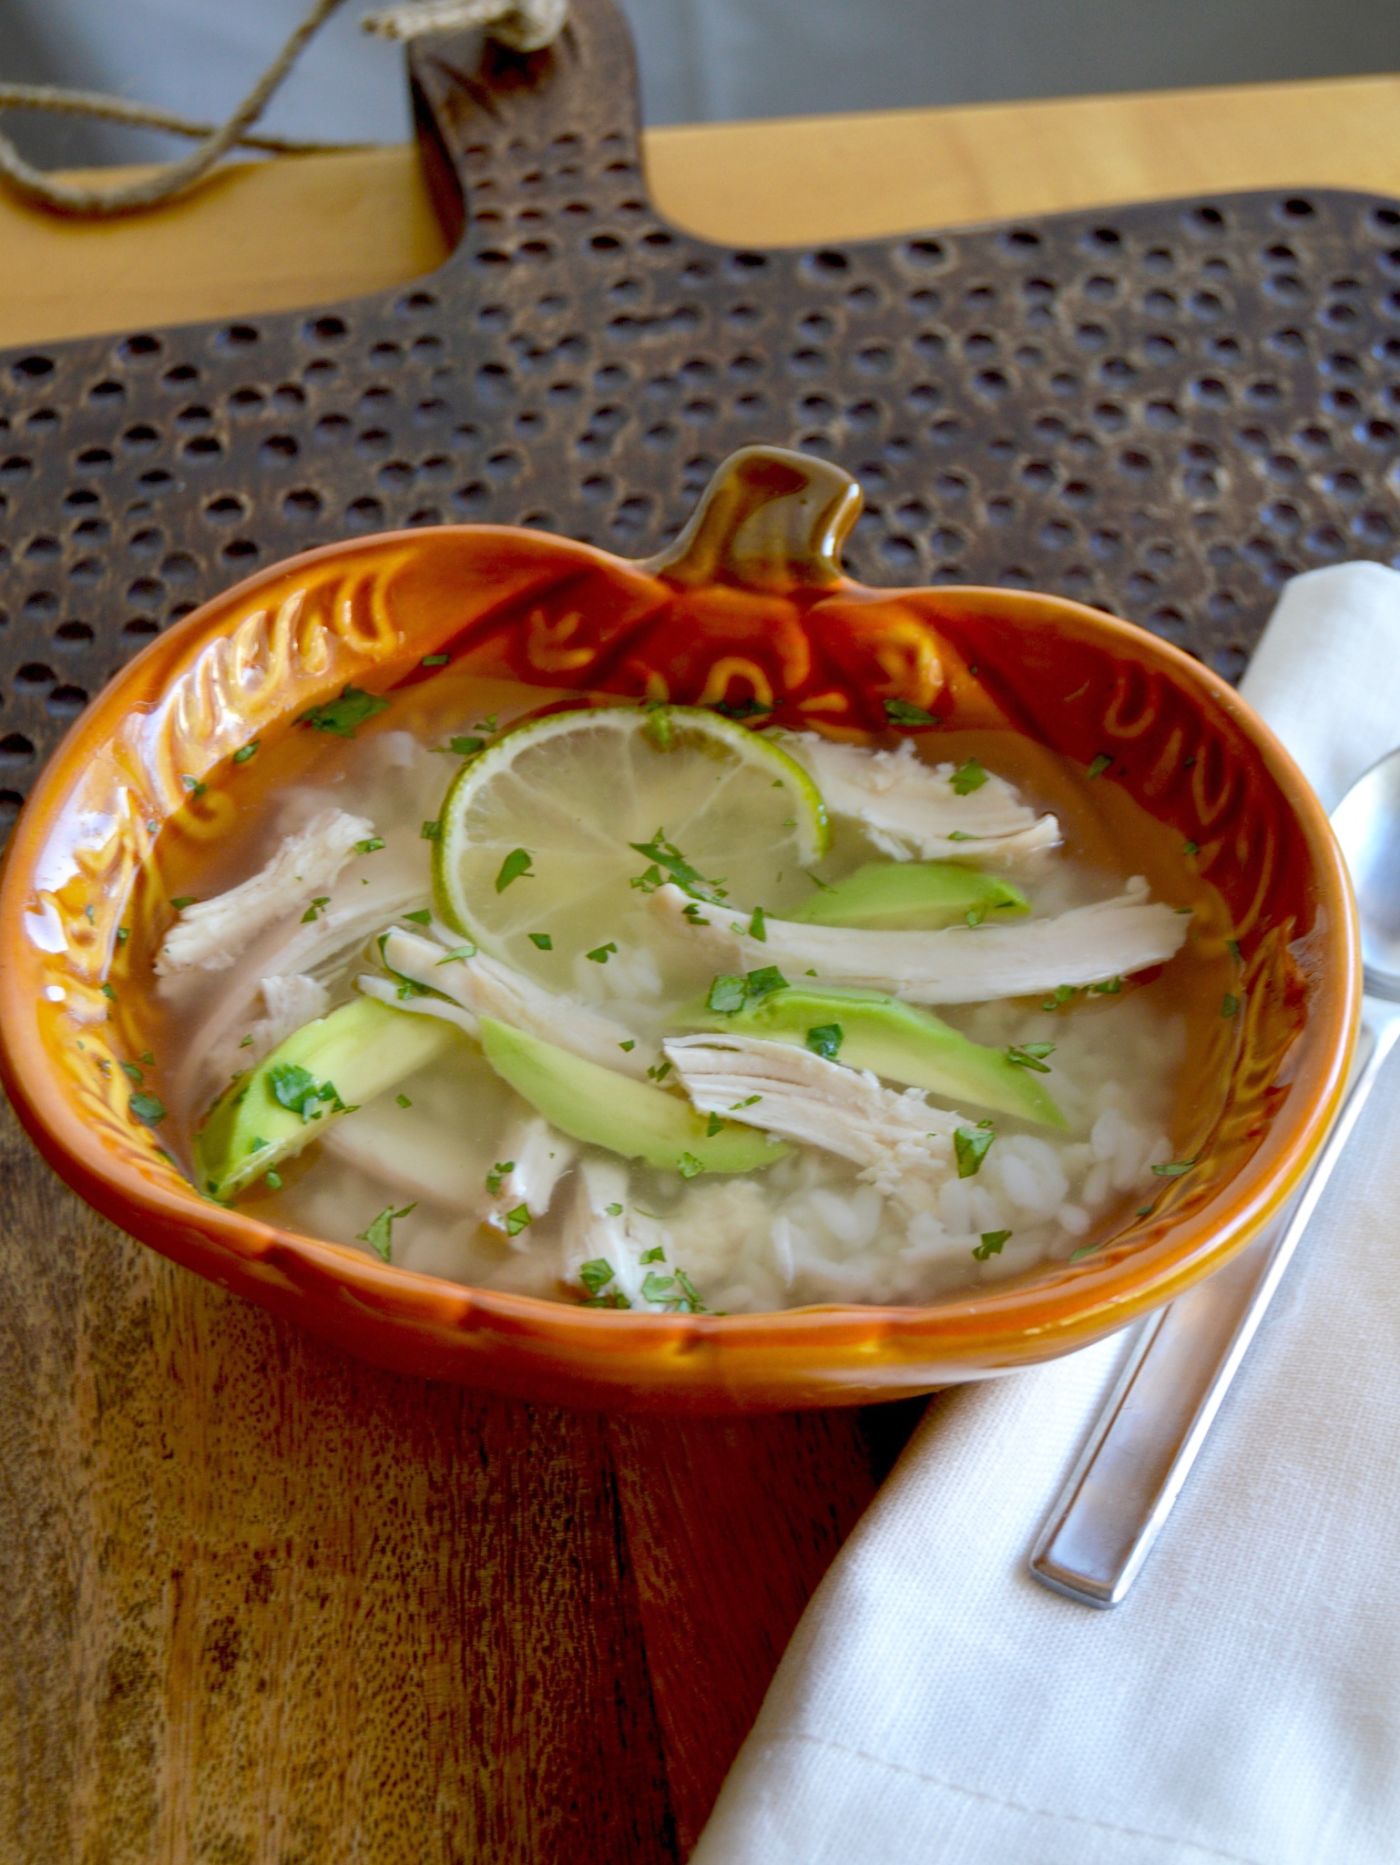 This recipe for Chicken and Rice Soup with Avocado can be made in about 30 minutes and tastes better than anything you can get at a restaurant or out of a can. www.westviamidwest.com